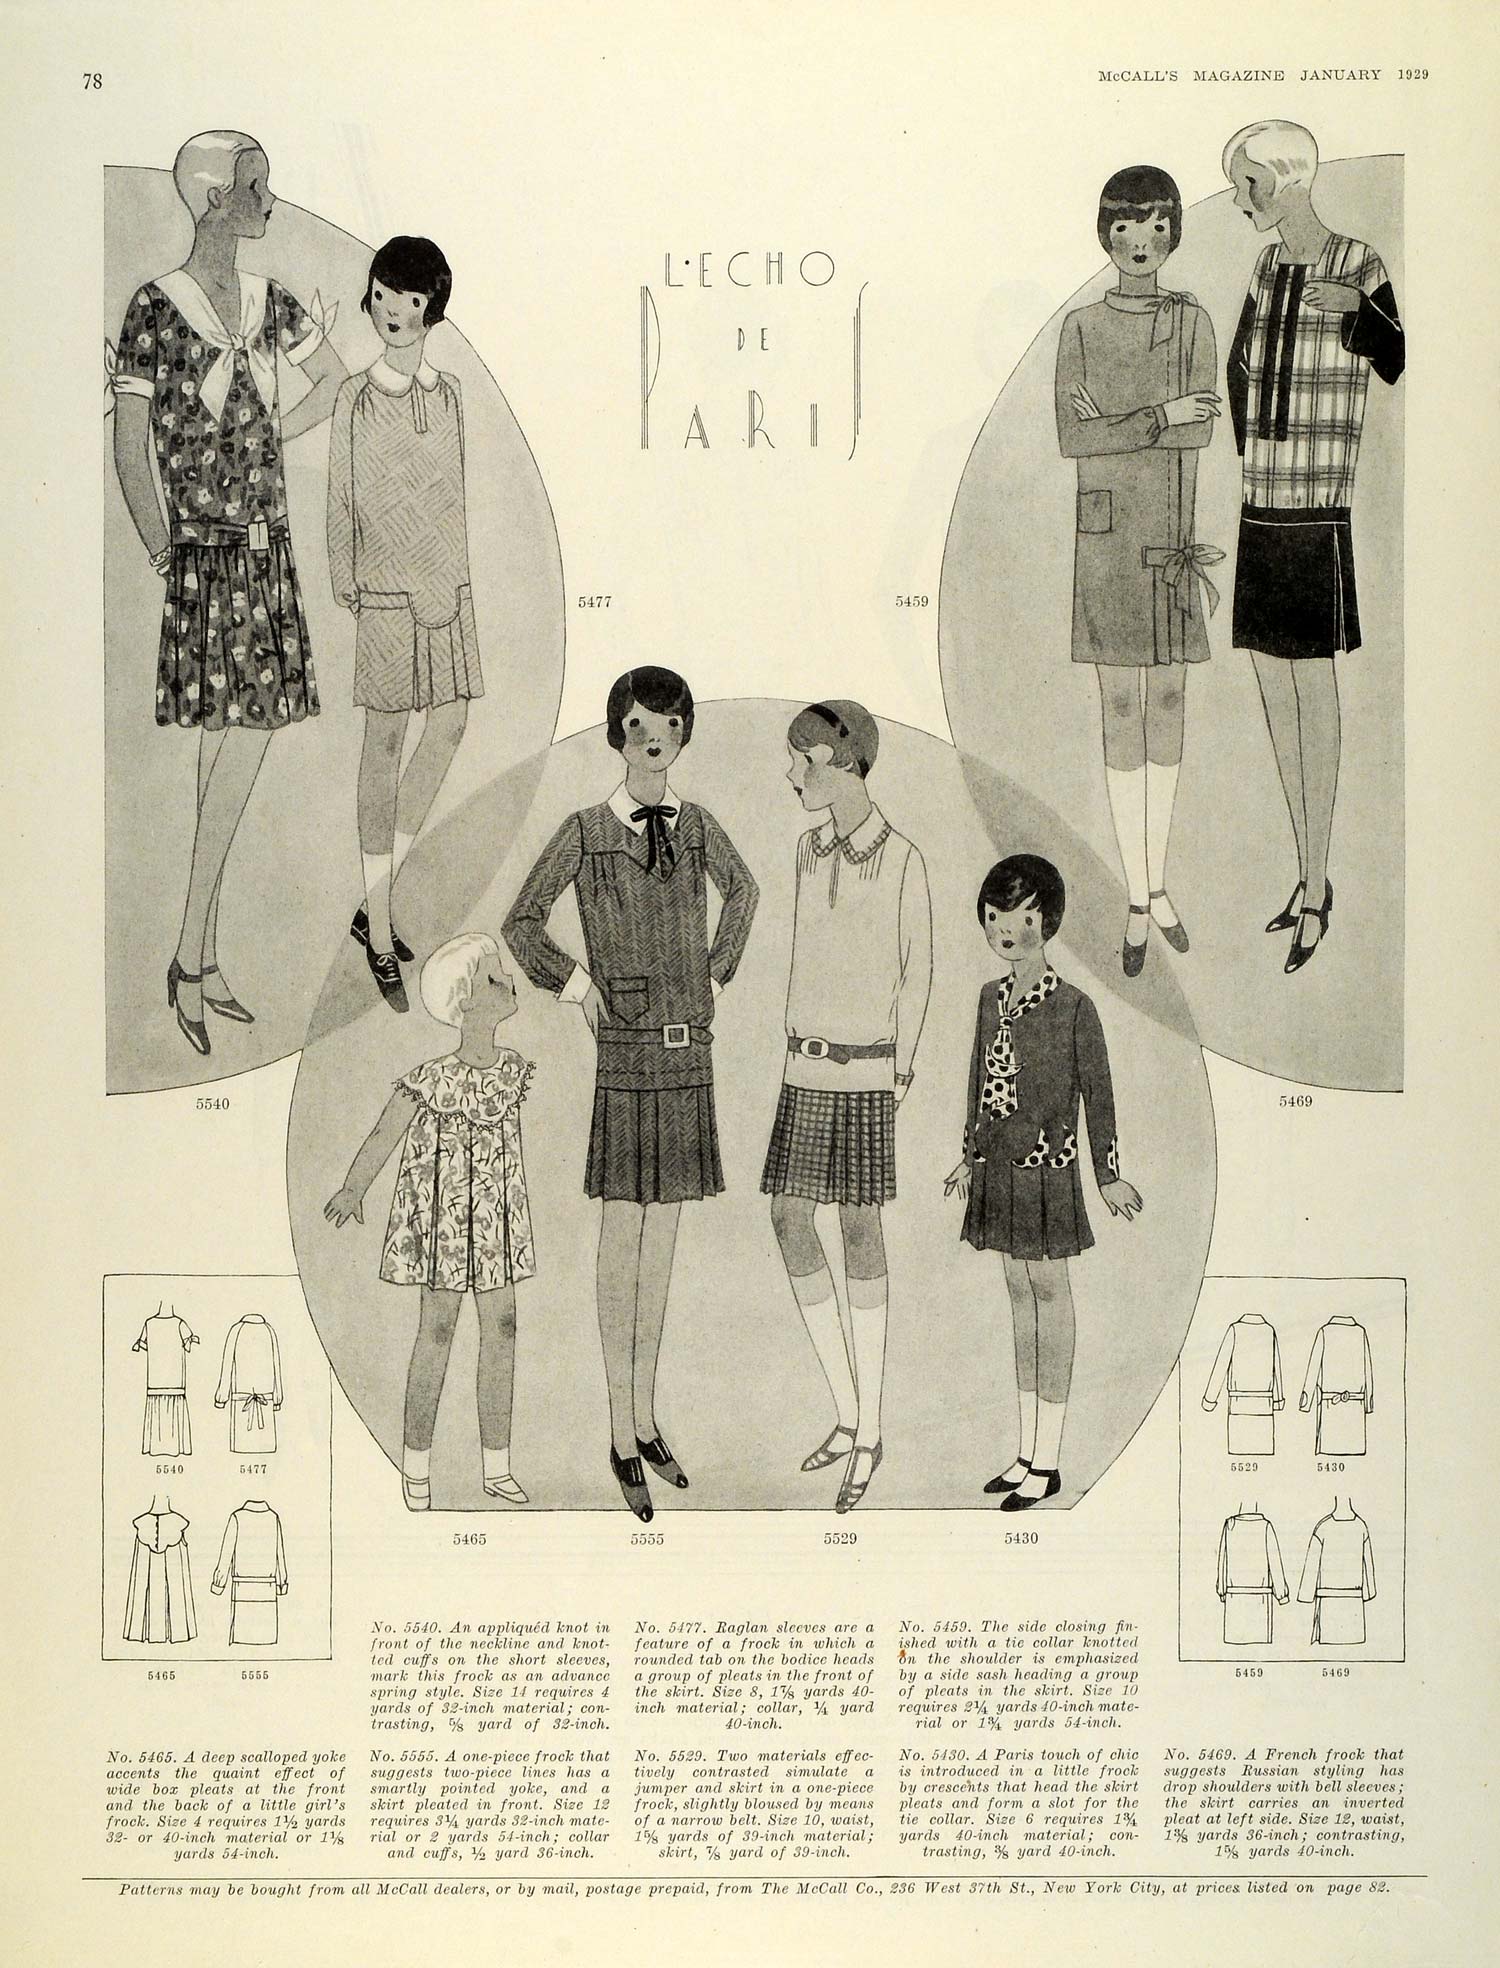 1920s styles fashions dresses clothing clothes teen girls 1929